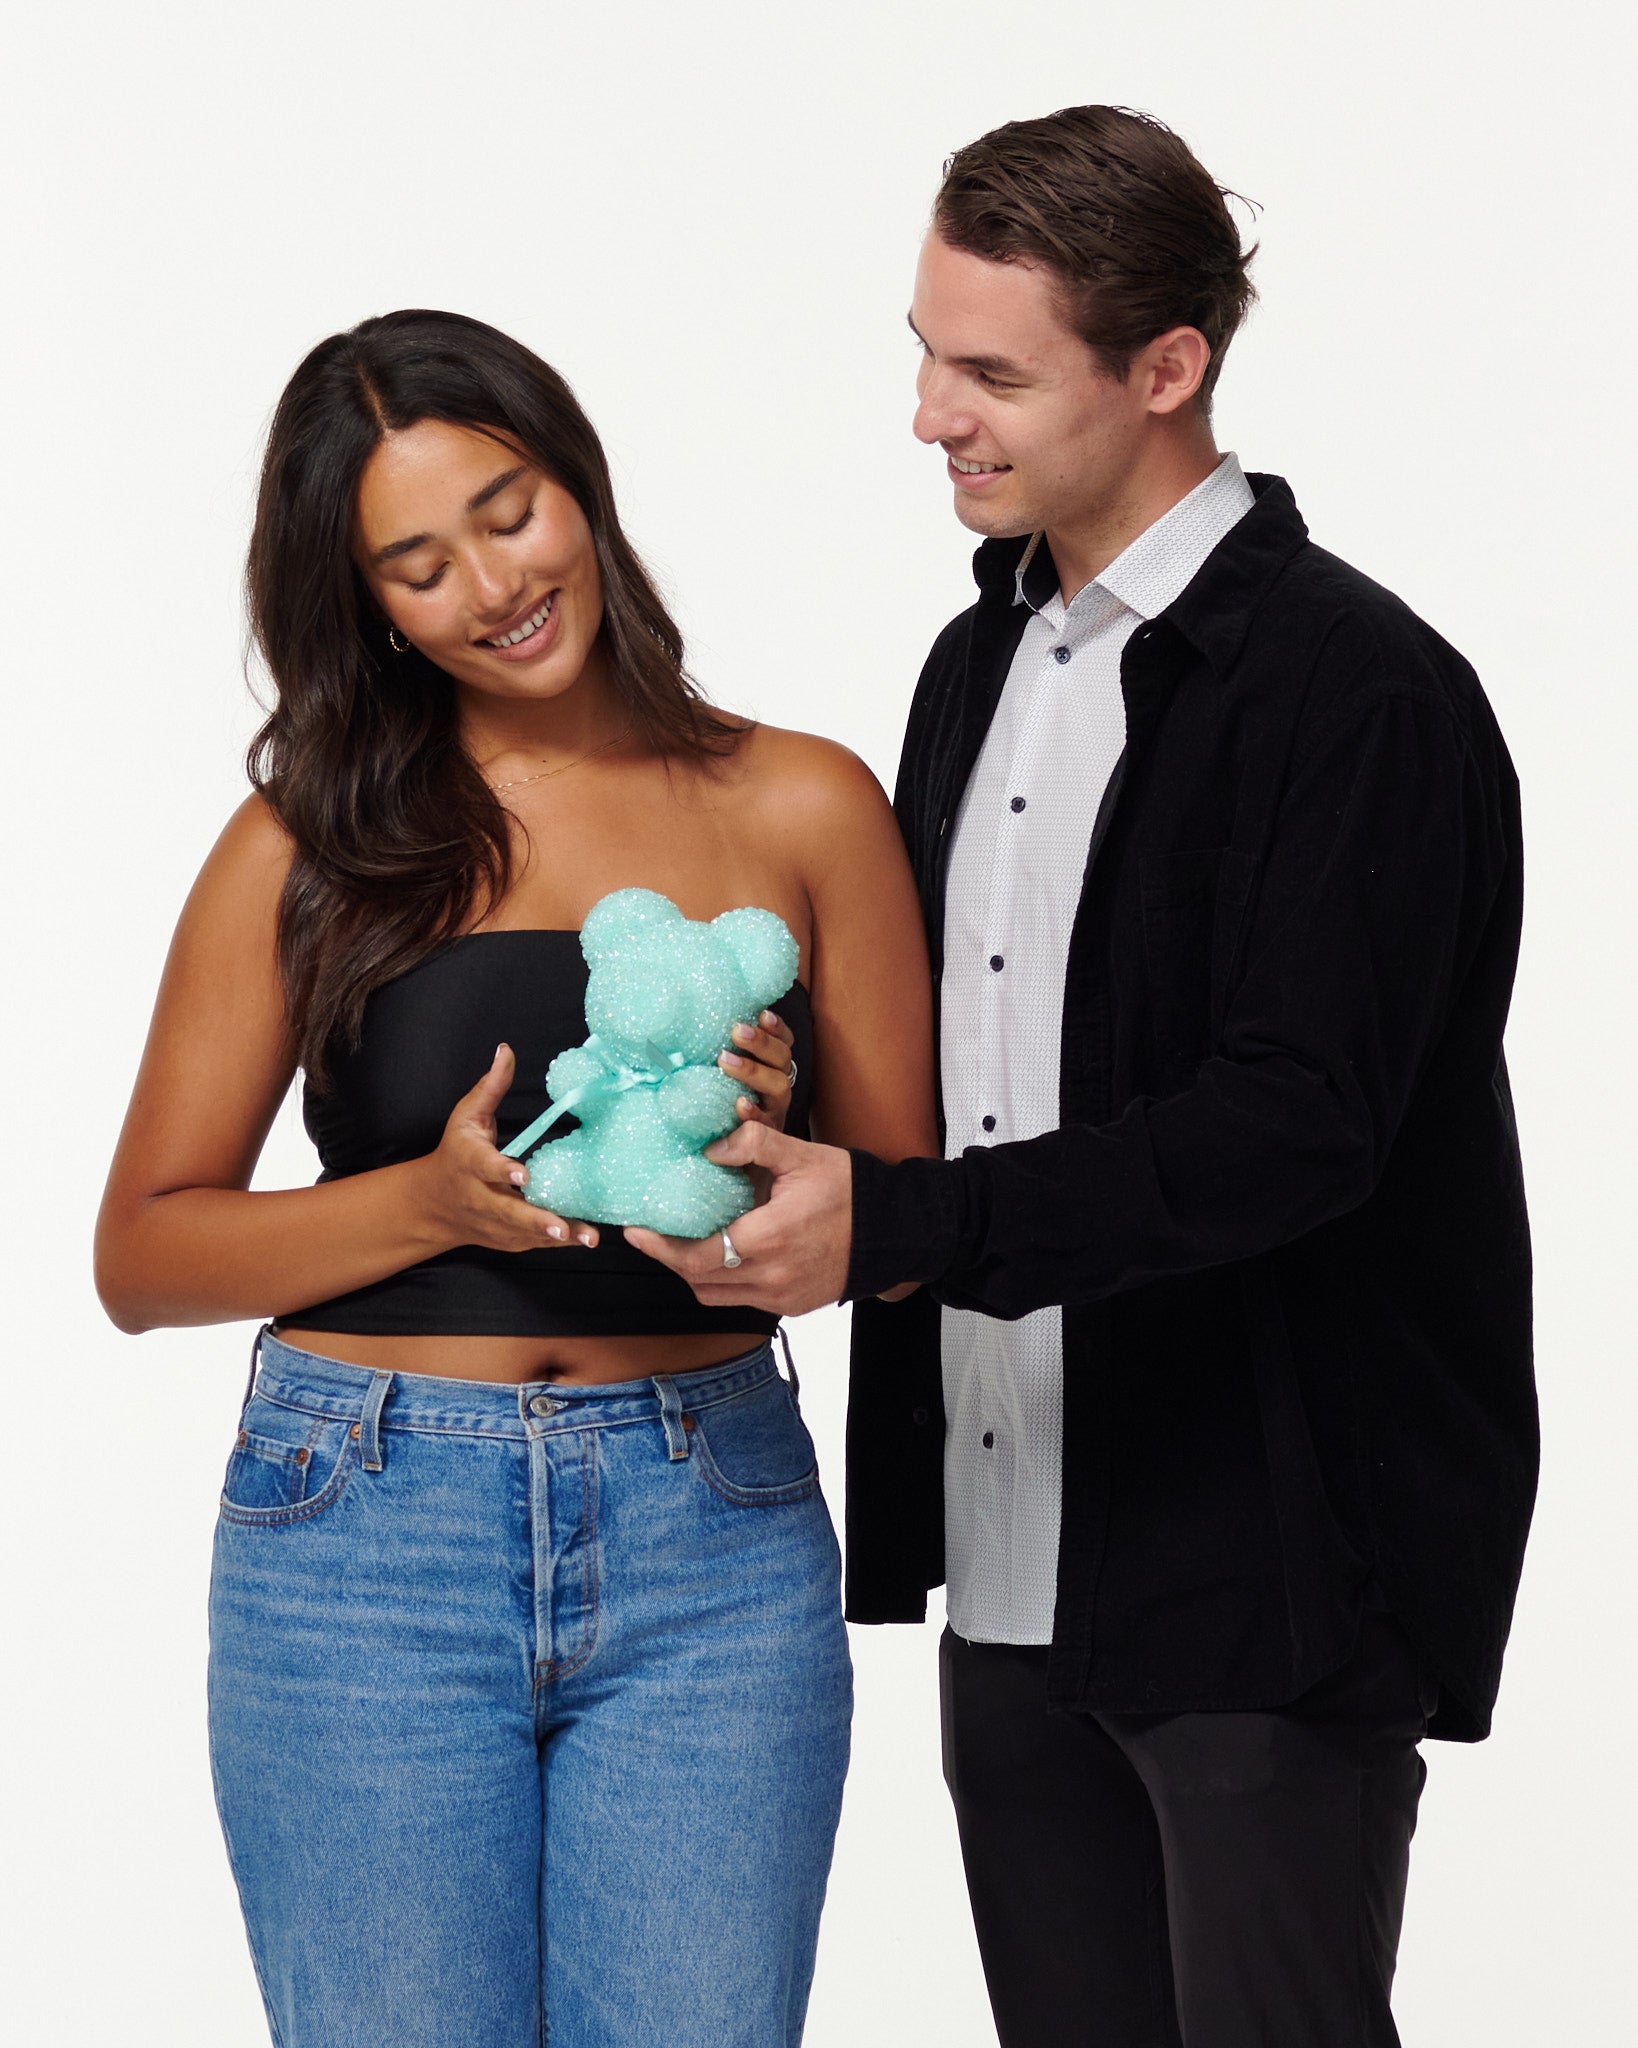 A woman in a black top and jeans admires a teal glitter bear, while a smiling man in a black jacket and white shirt gently touches the bear's arm. They appear to be in a light-hearted, affectionate interaction.